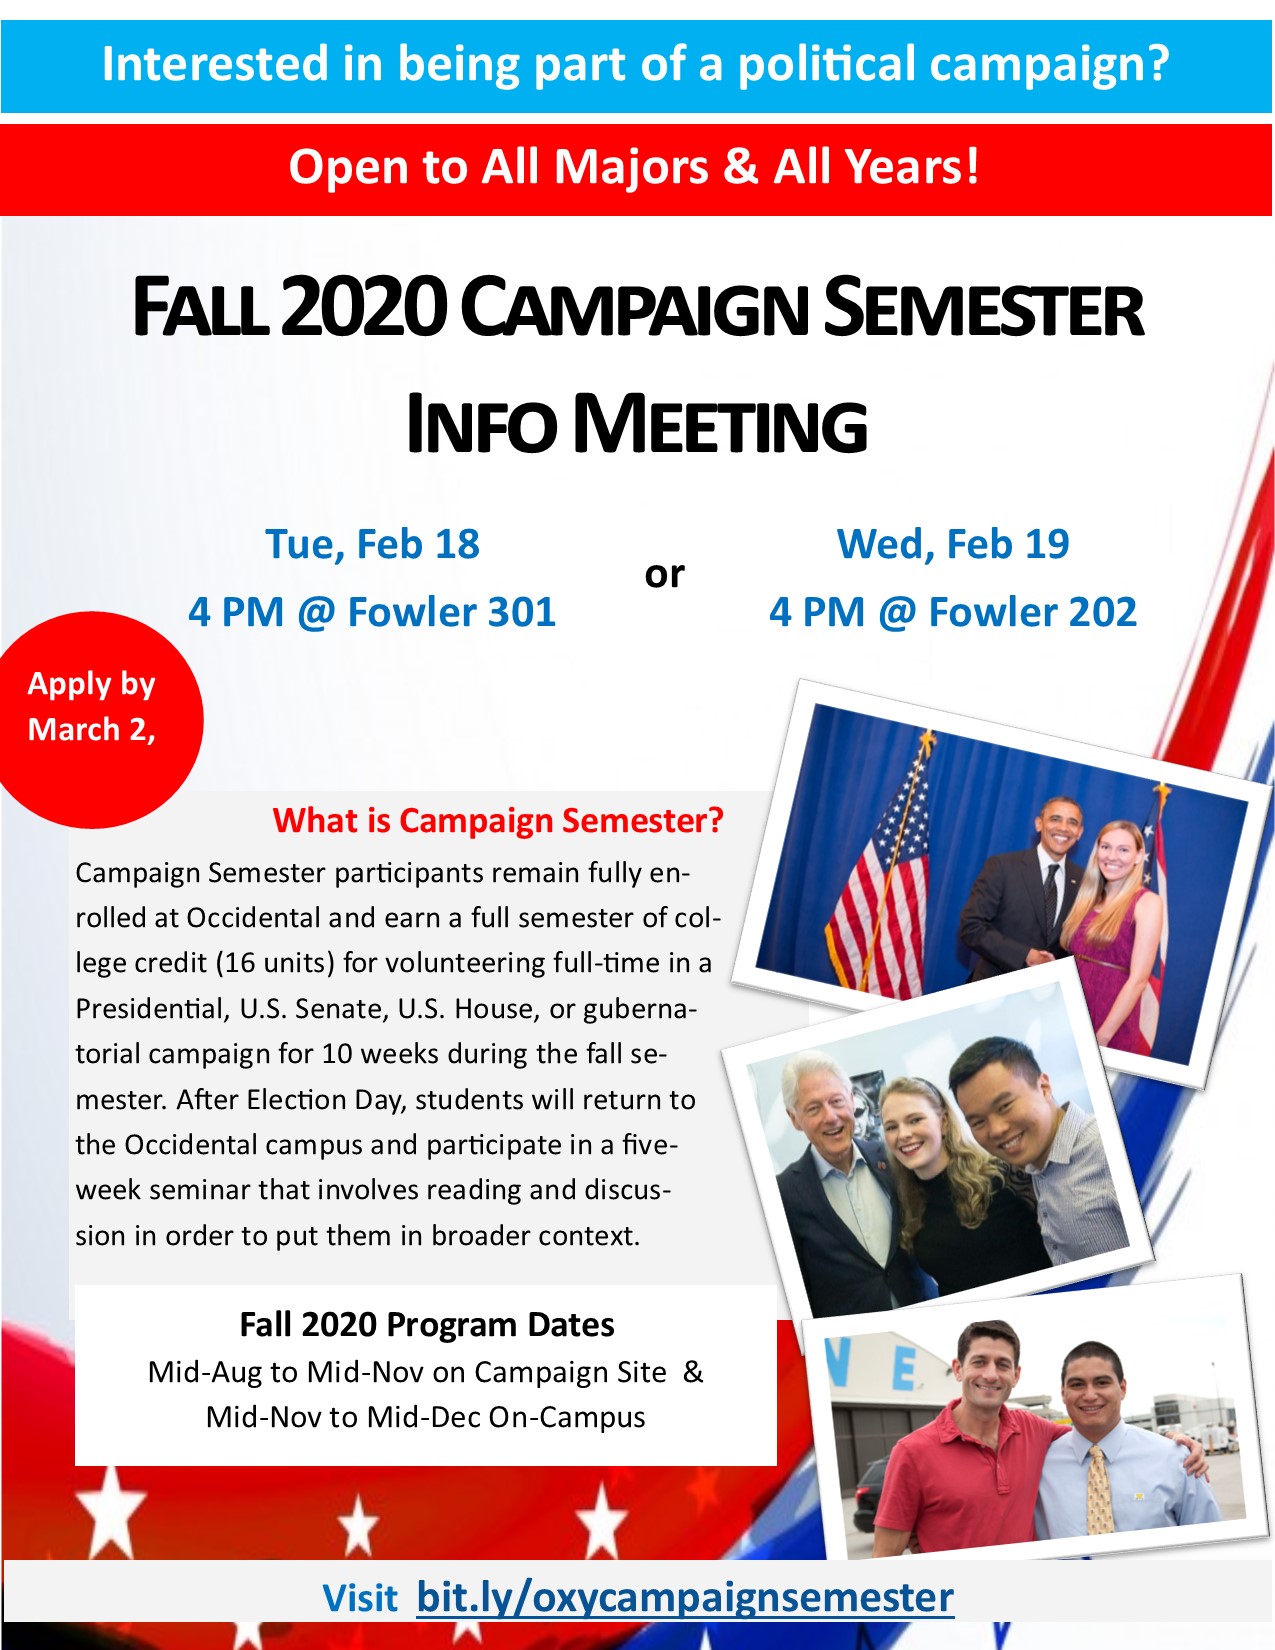 Fall 2020 Campaign Semester Info Meeting